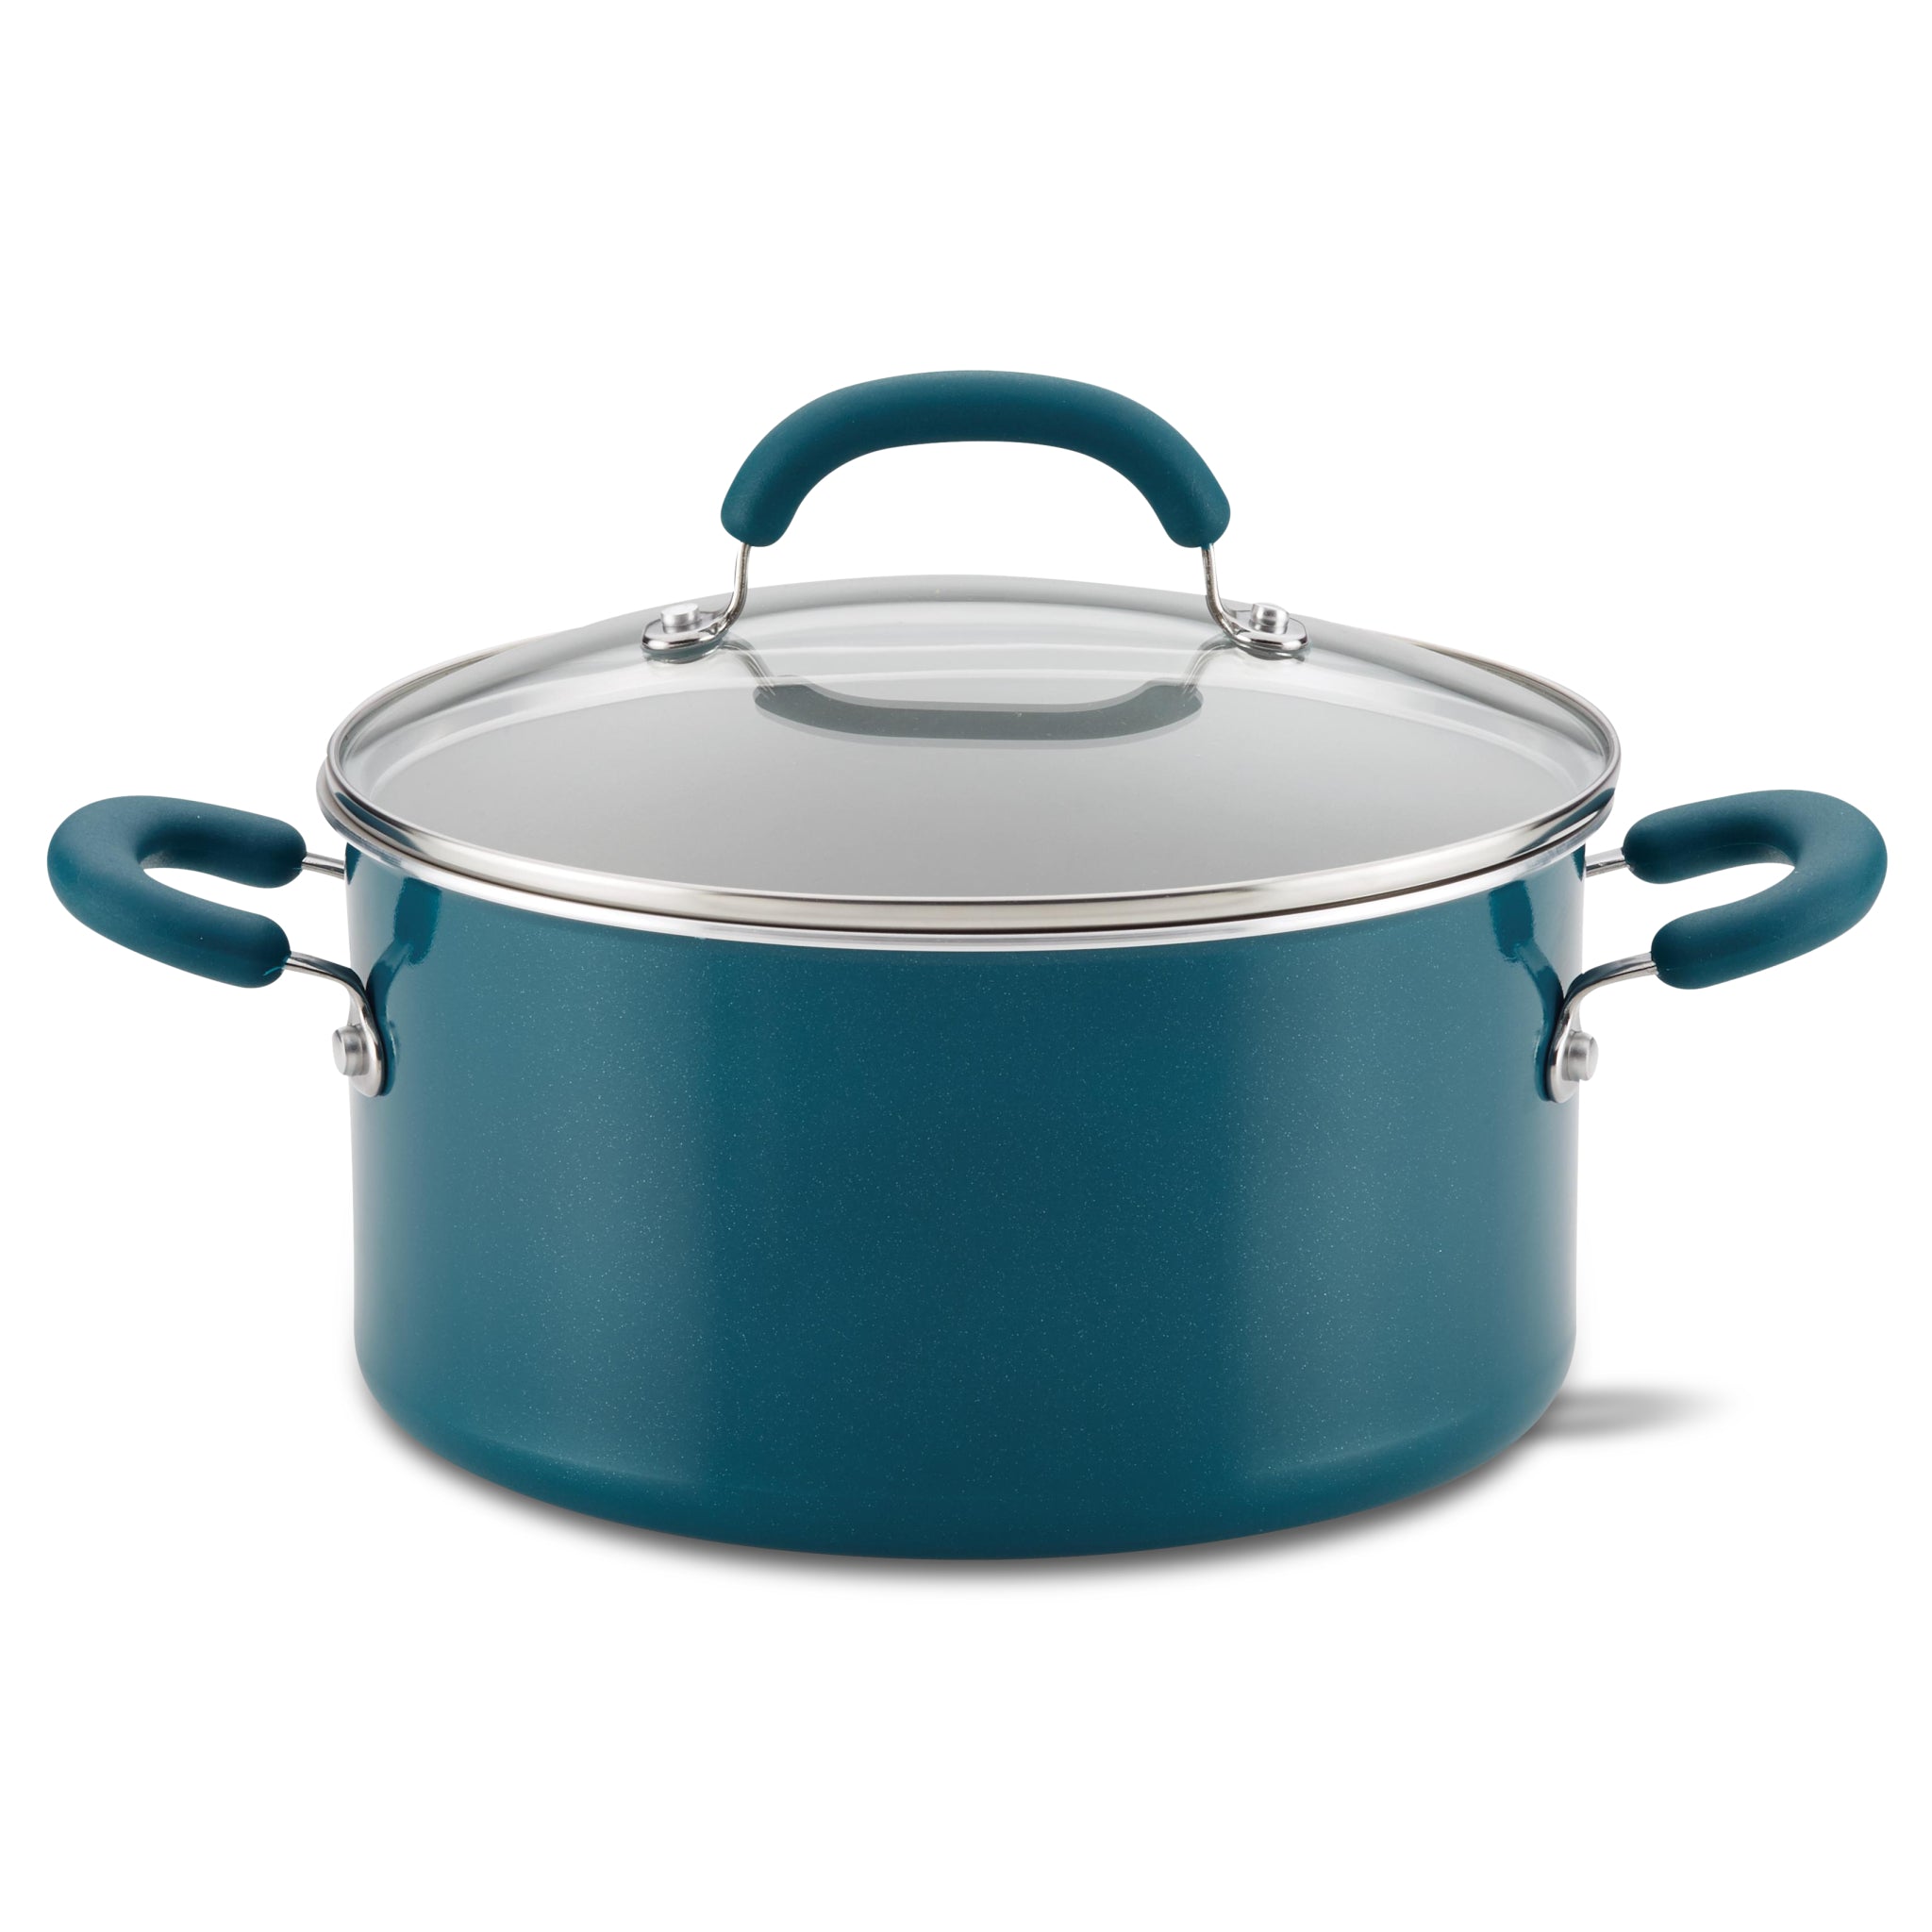 Rachael Ray 8-Quart Covered Oval Pasta Pot with Pour Spout, Green 